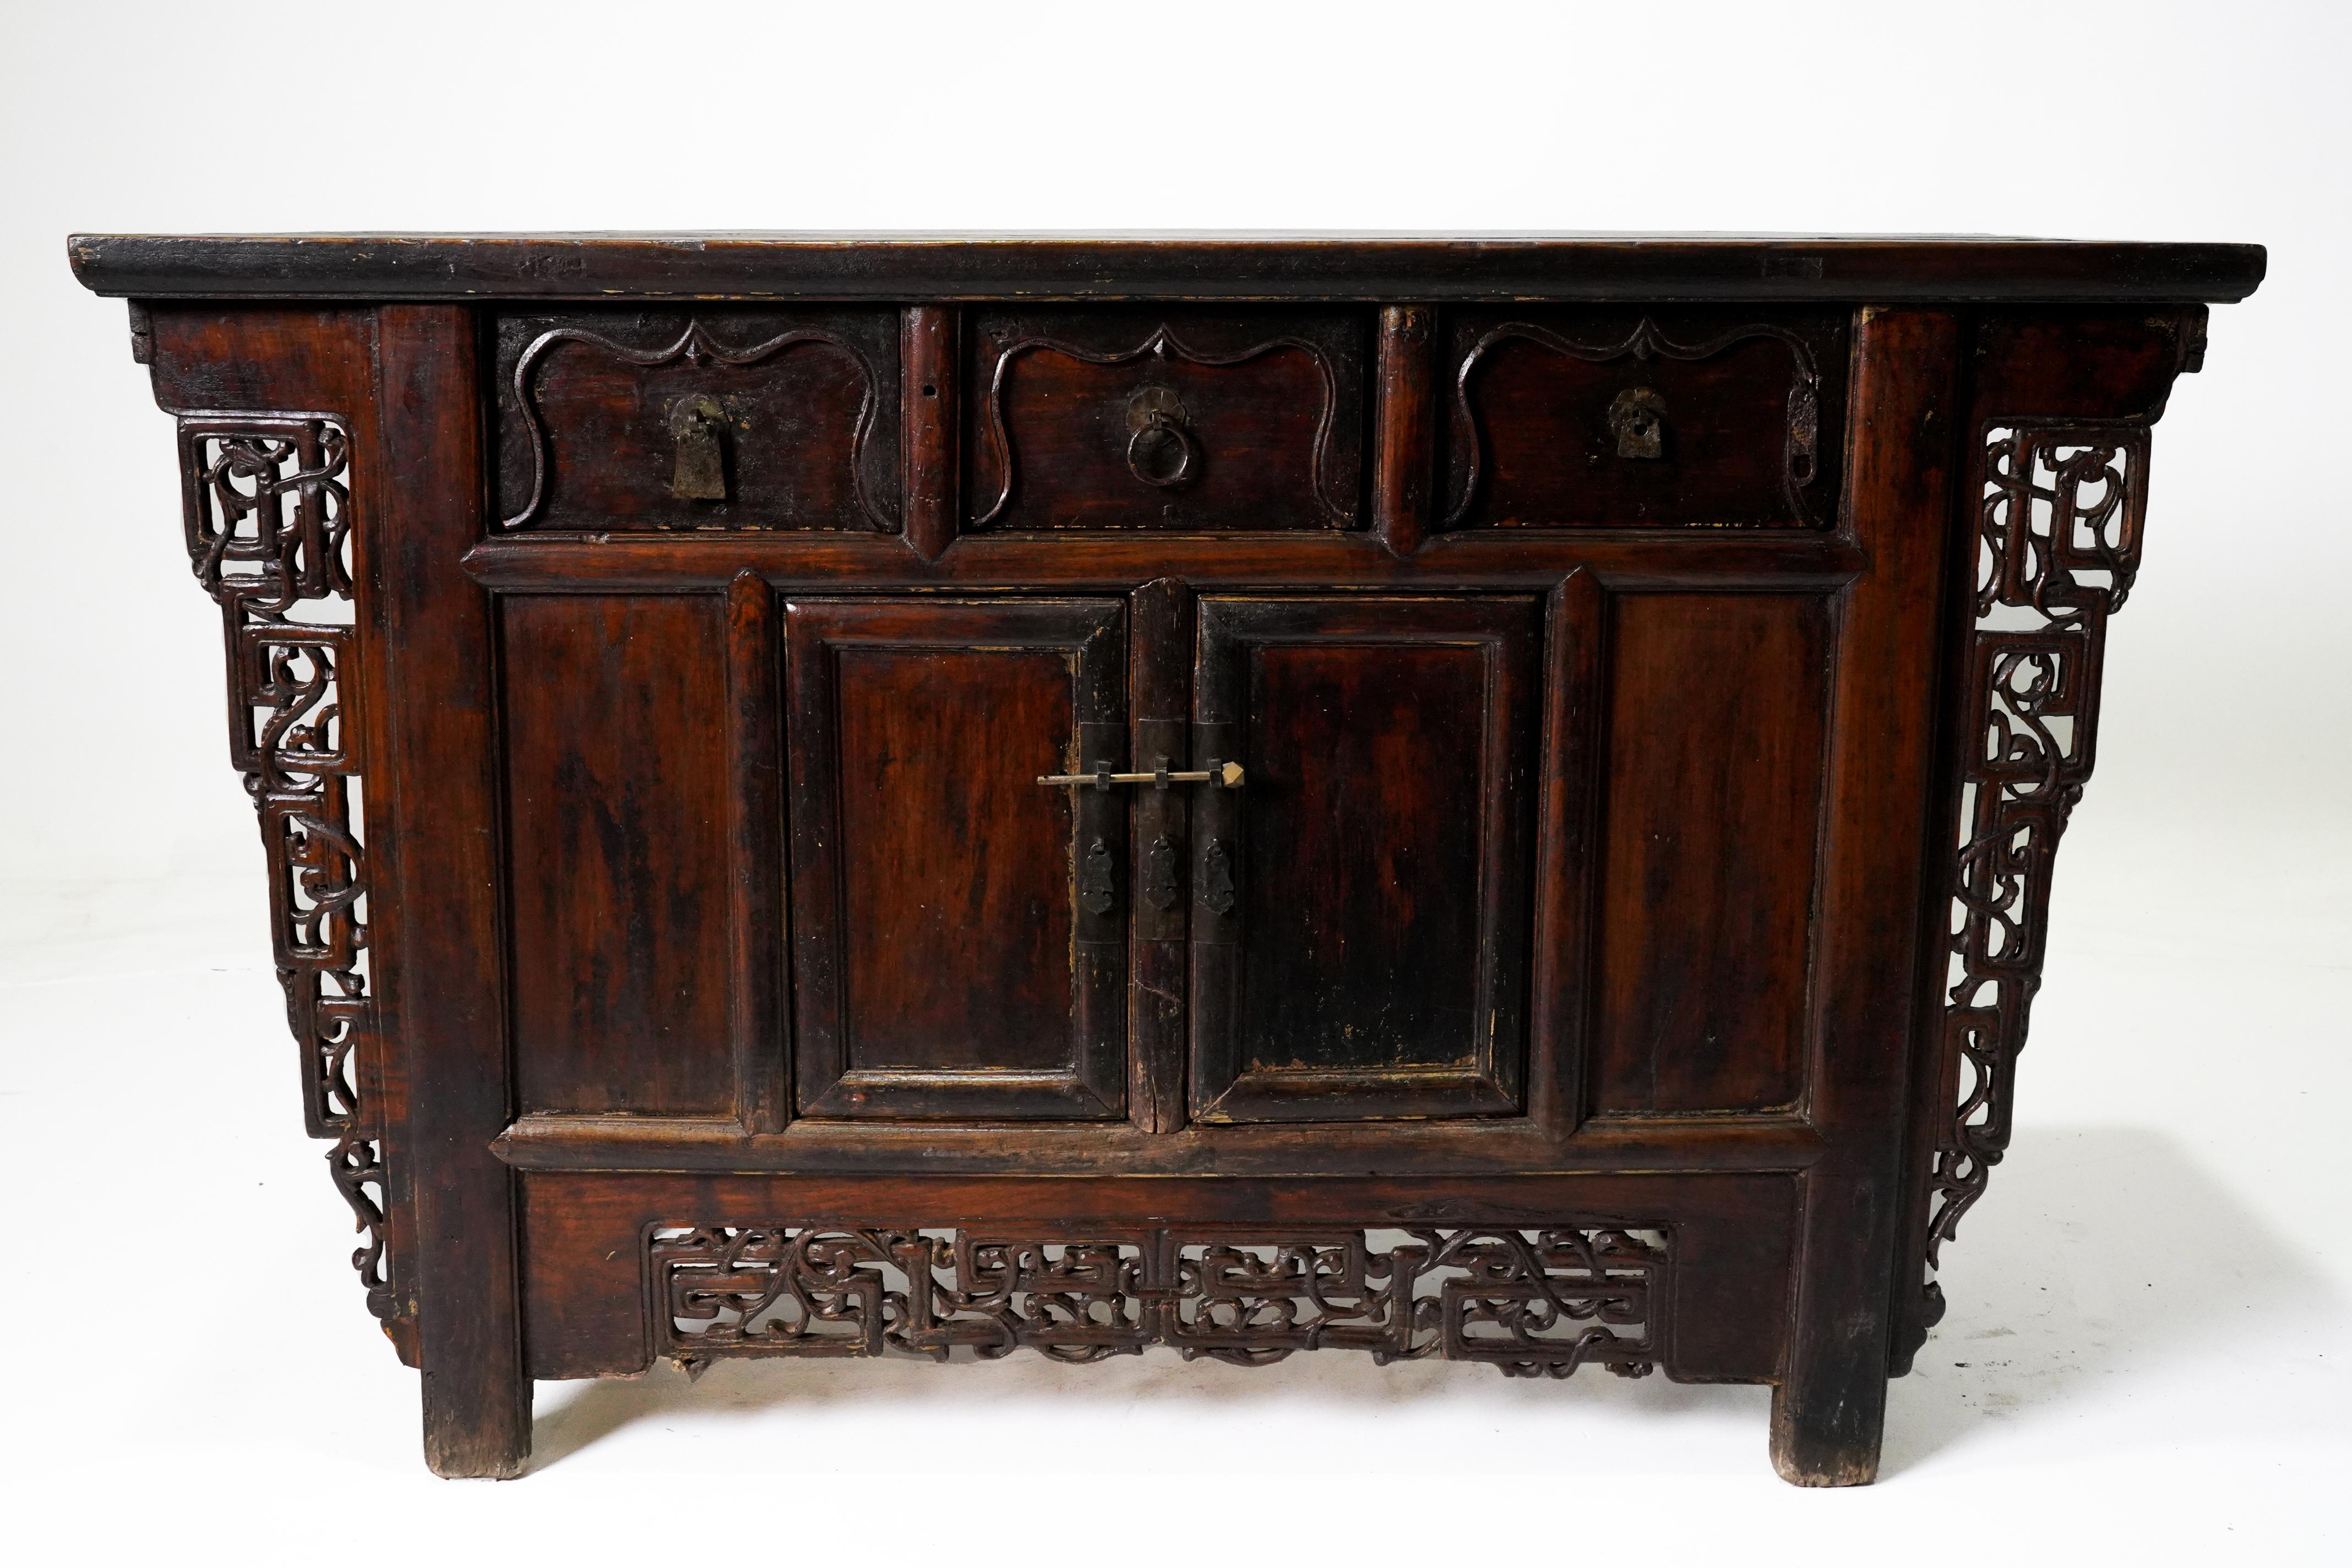 A Chinese Ming-style wooden butterfly cabinet from the 19th century, with carved spandrels, drawers, doors and dark oxblood patina. This elegant coffer, called a butterfly cabinet, features a rectangular floating panel top sitting above three